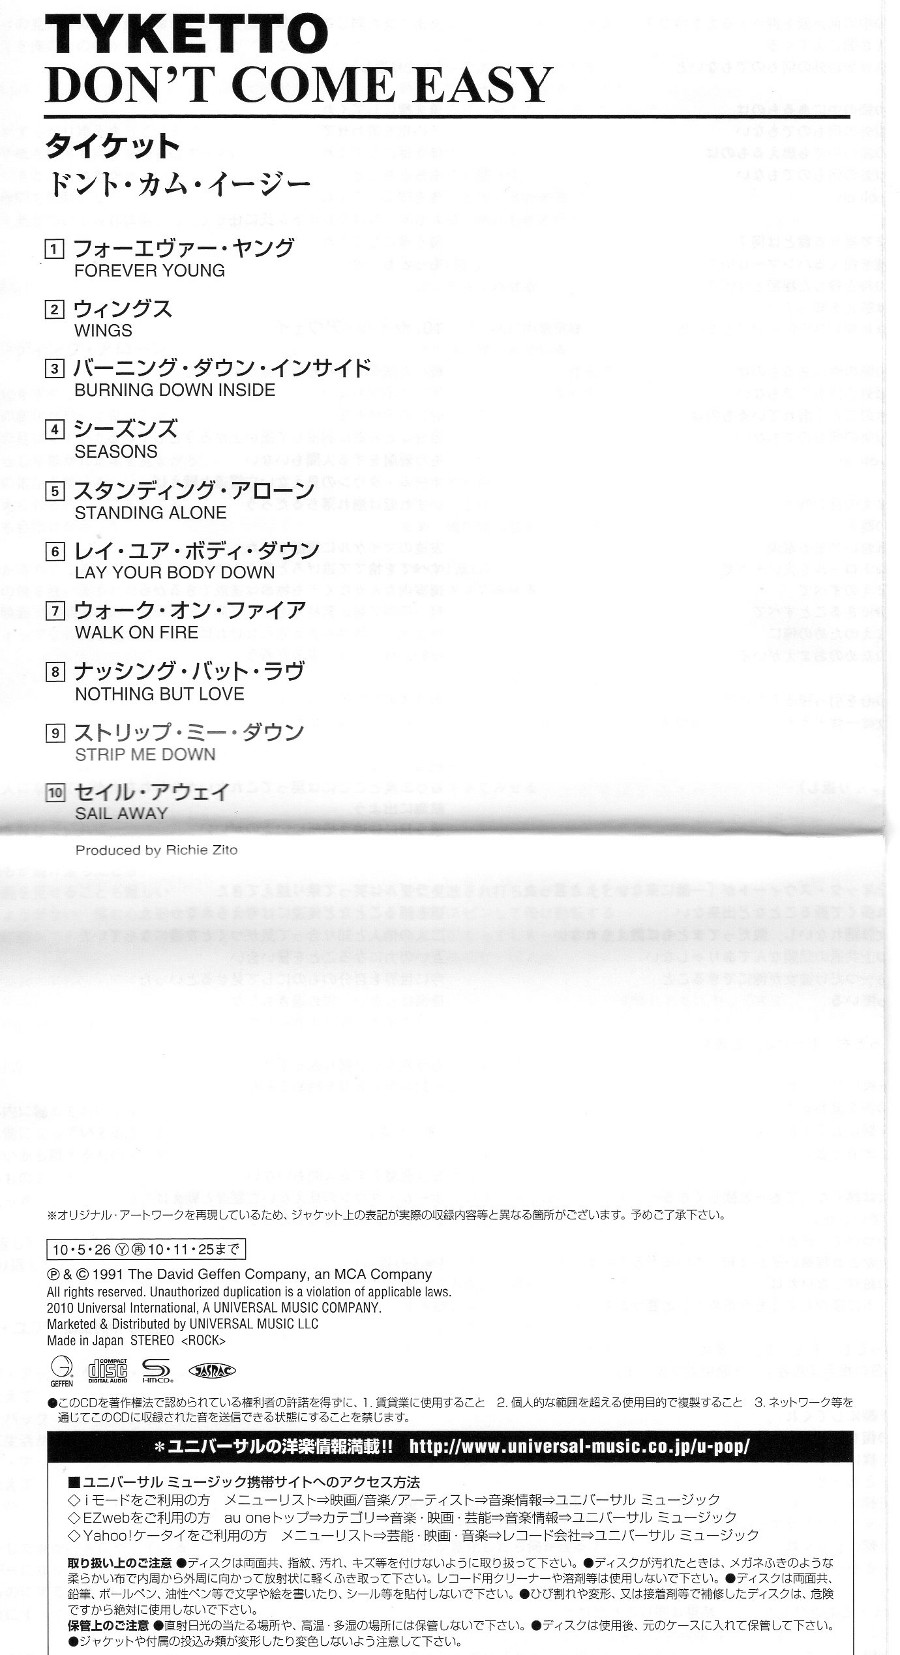 Foldout sheets with english & japanese lyrics, Tyketto - Don't Come Easy